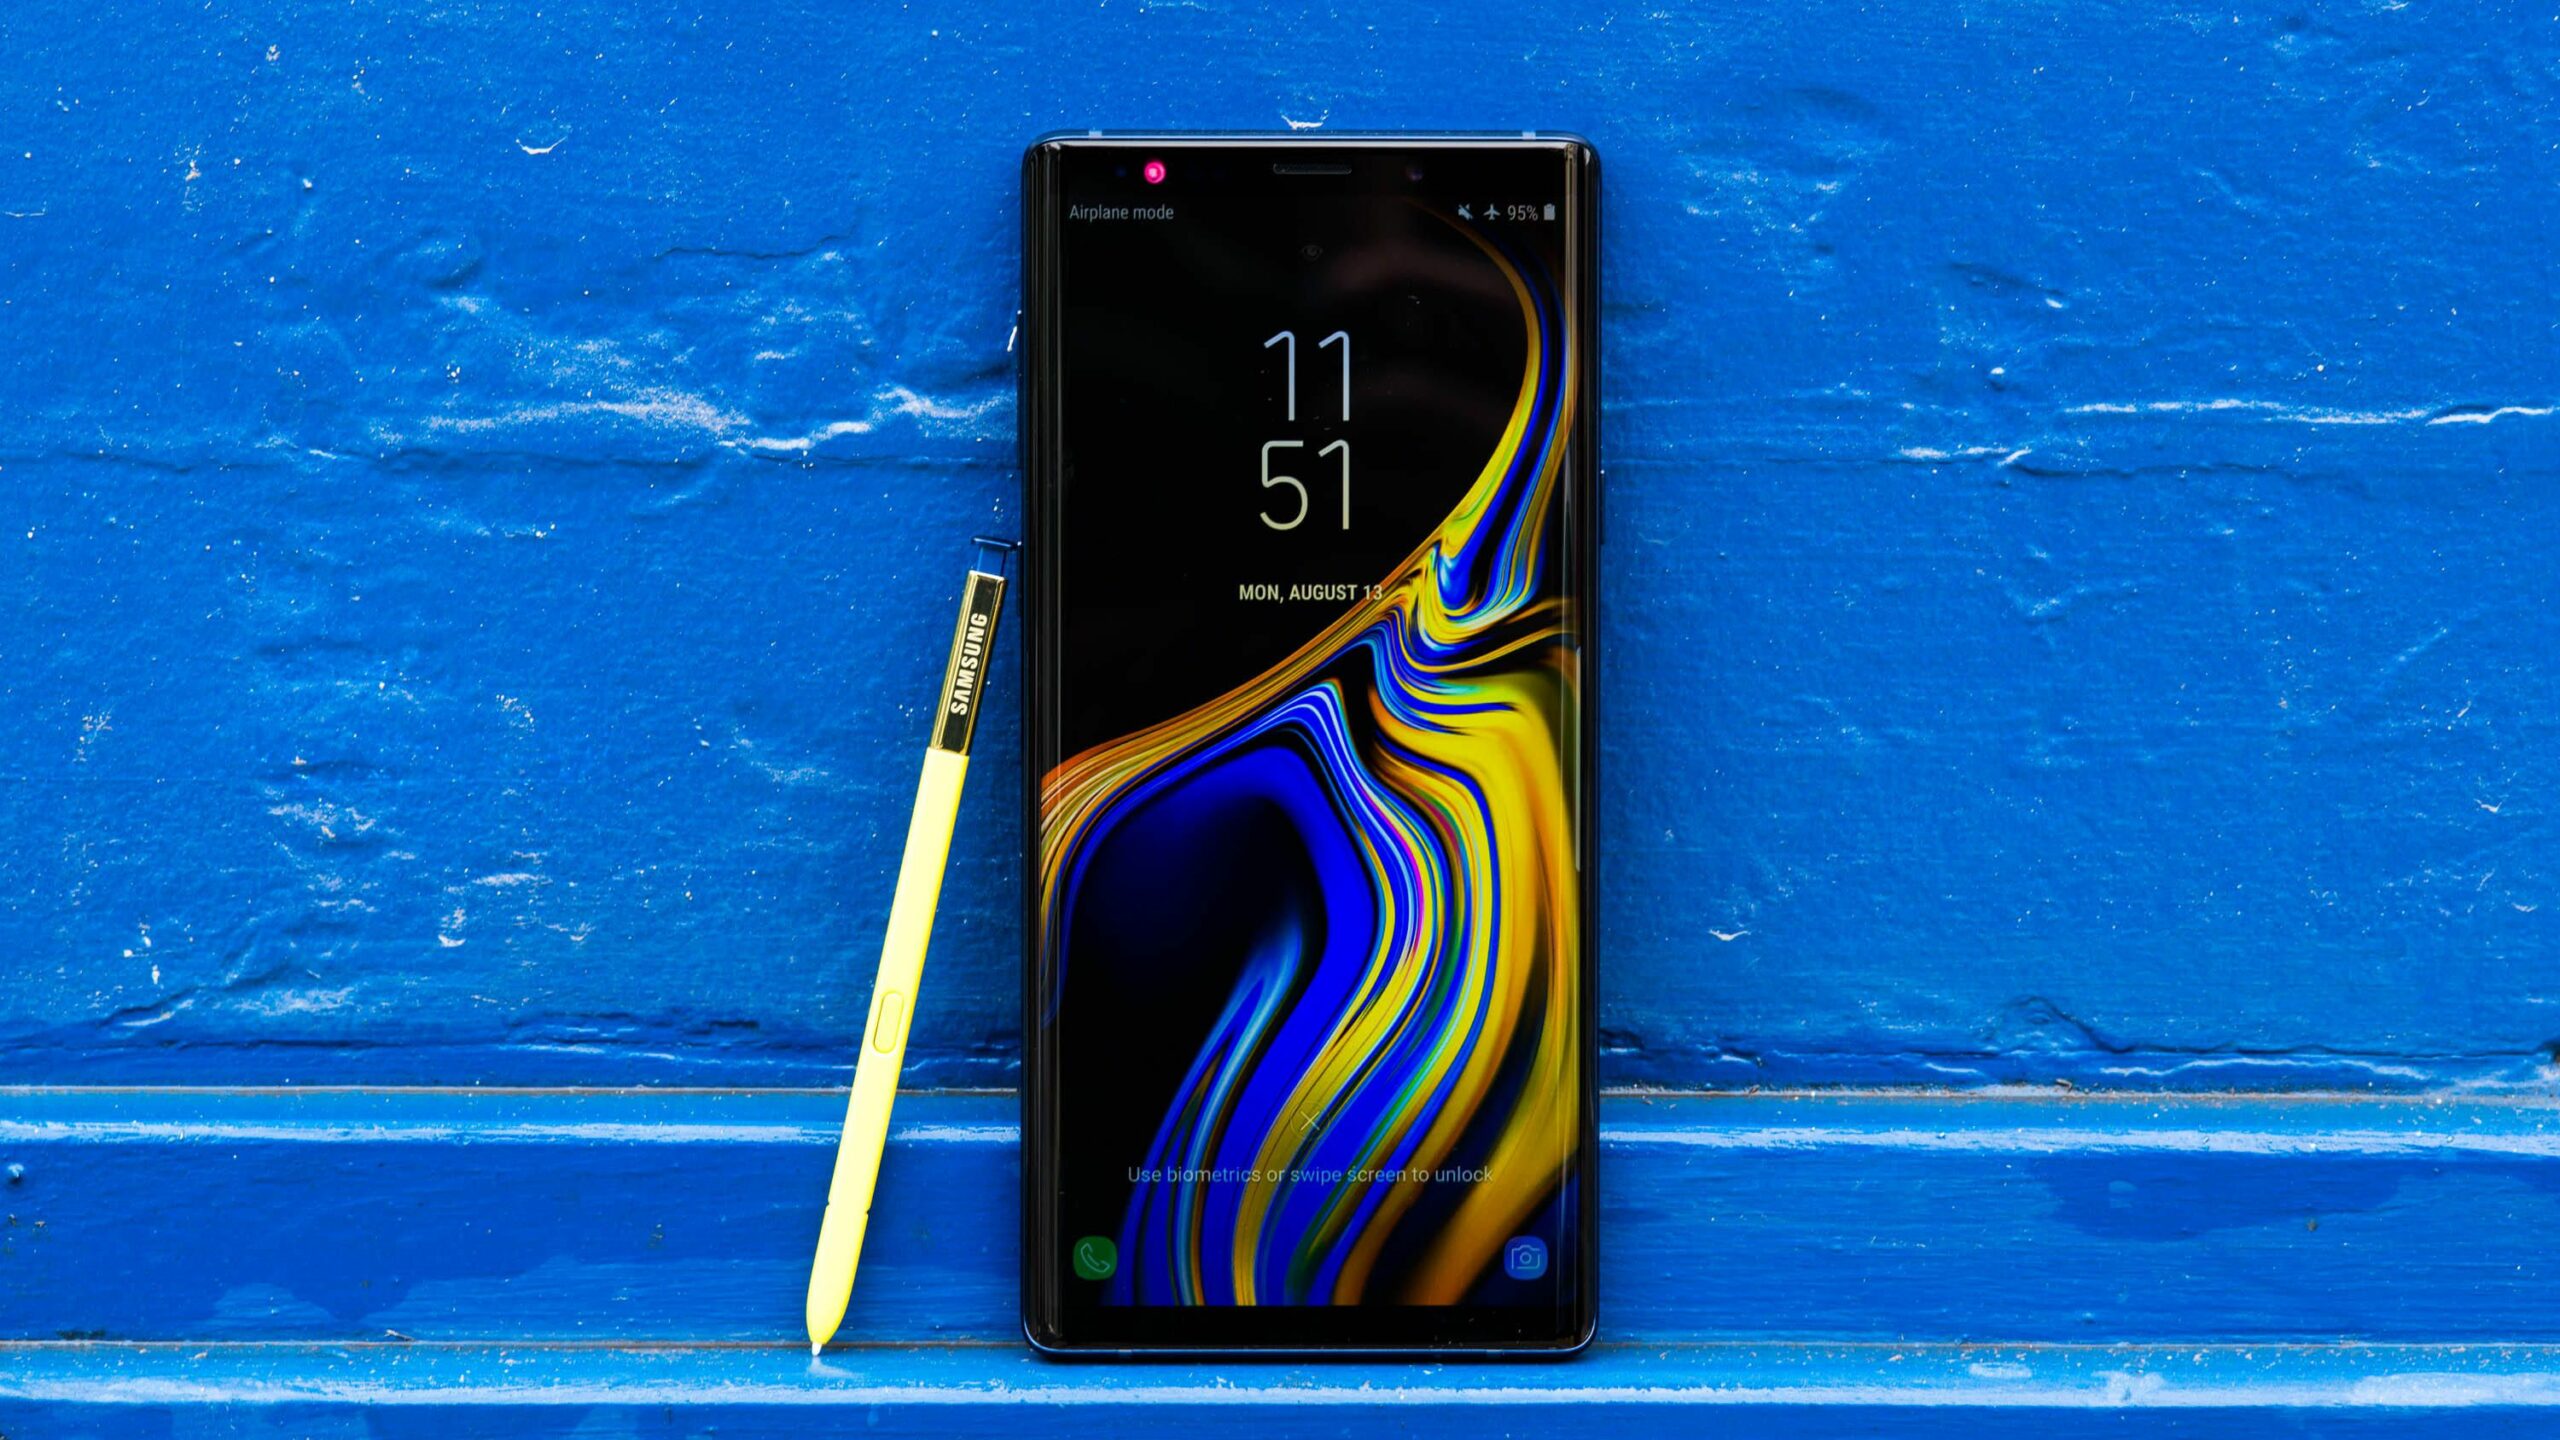 Galaxy Note 9 starts getting March security update, bug fixes